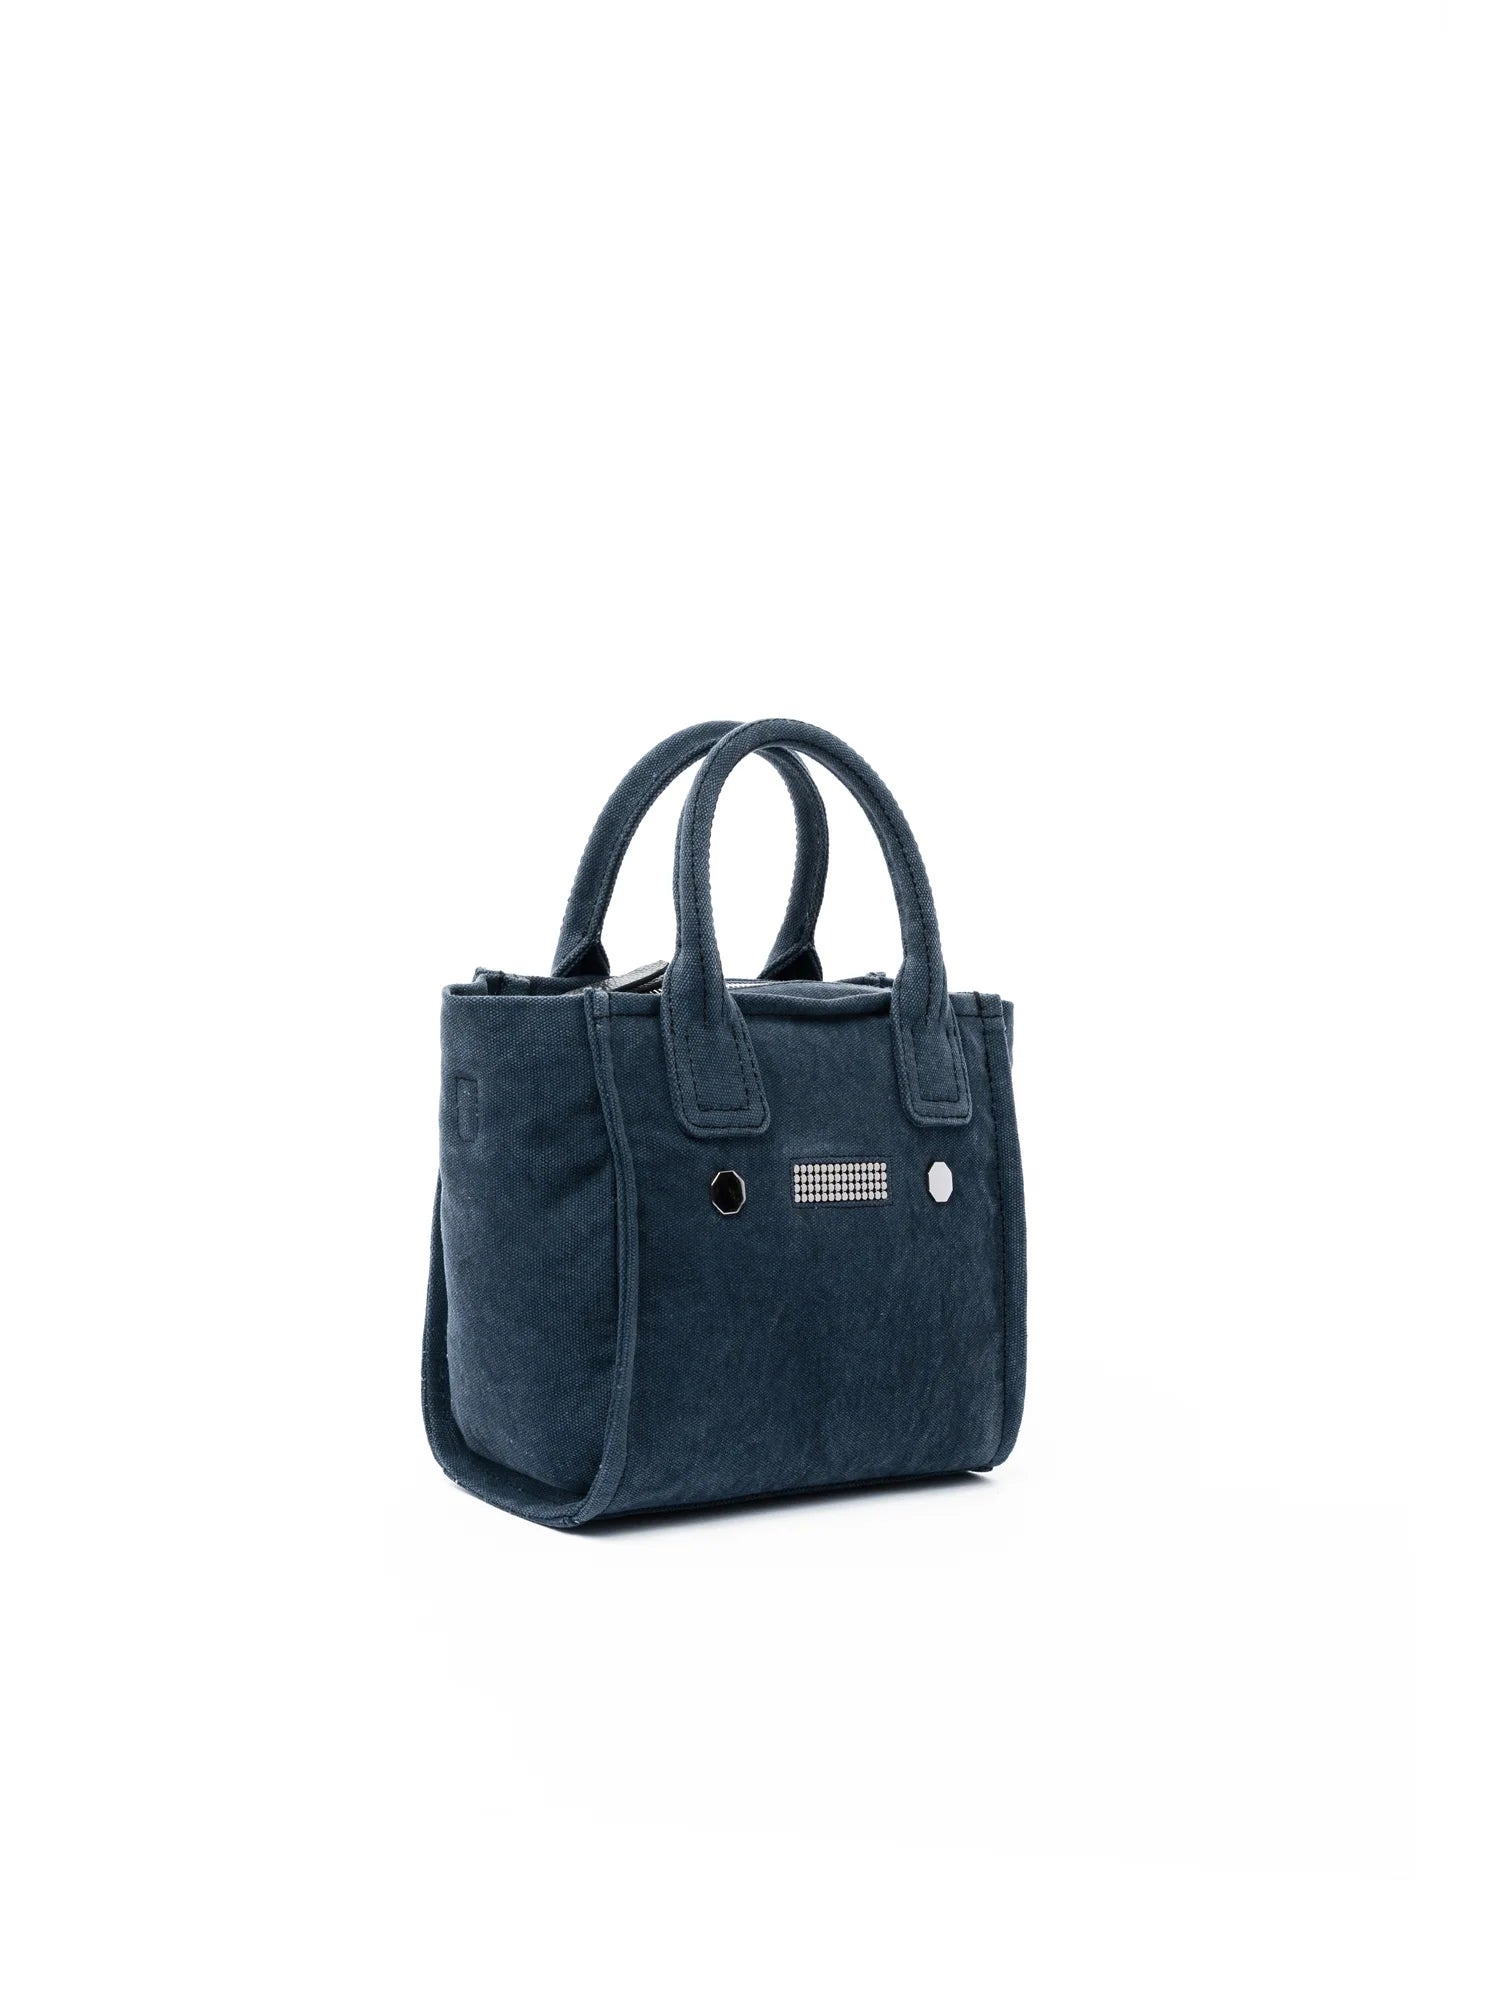 SAC CLIO GIRLY WASHED CANVAS